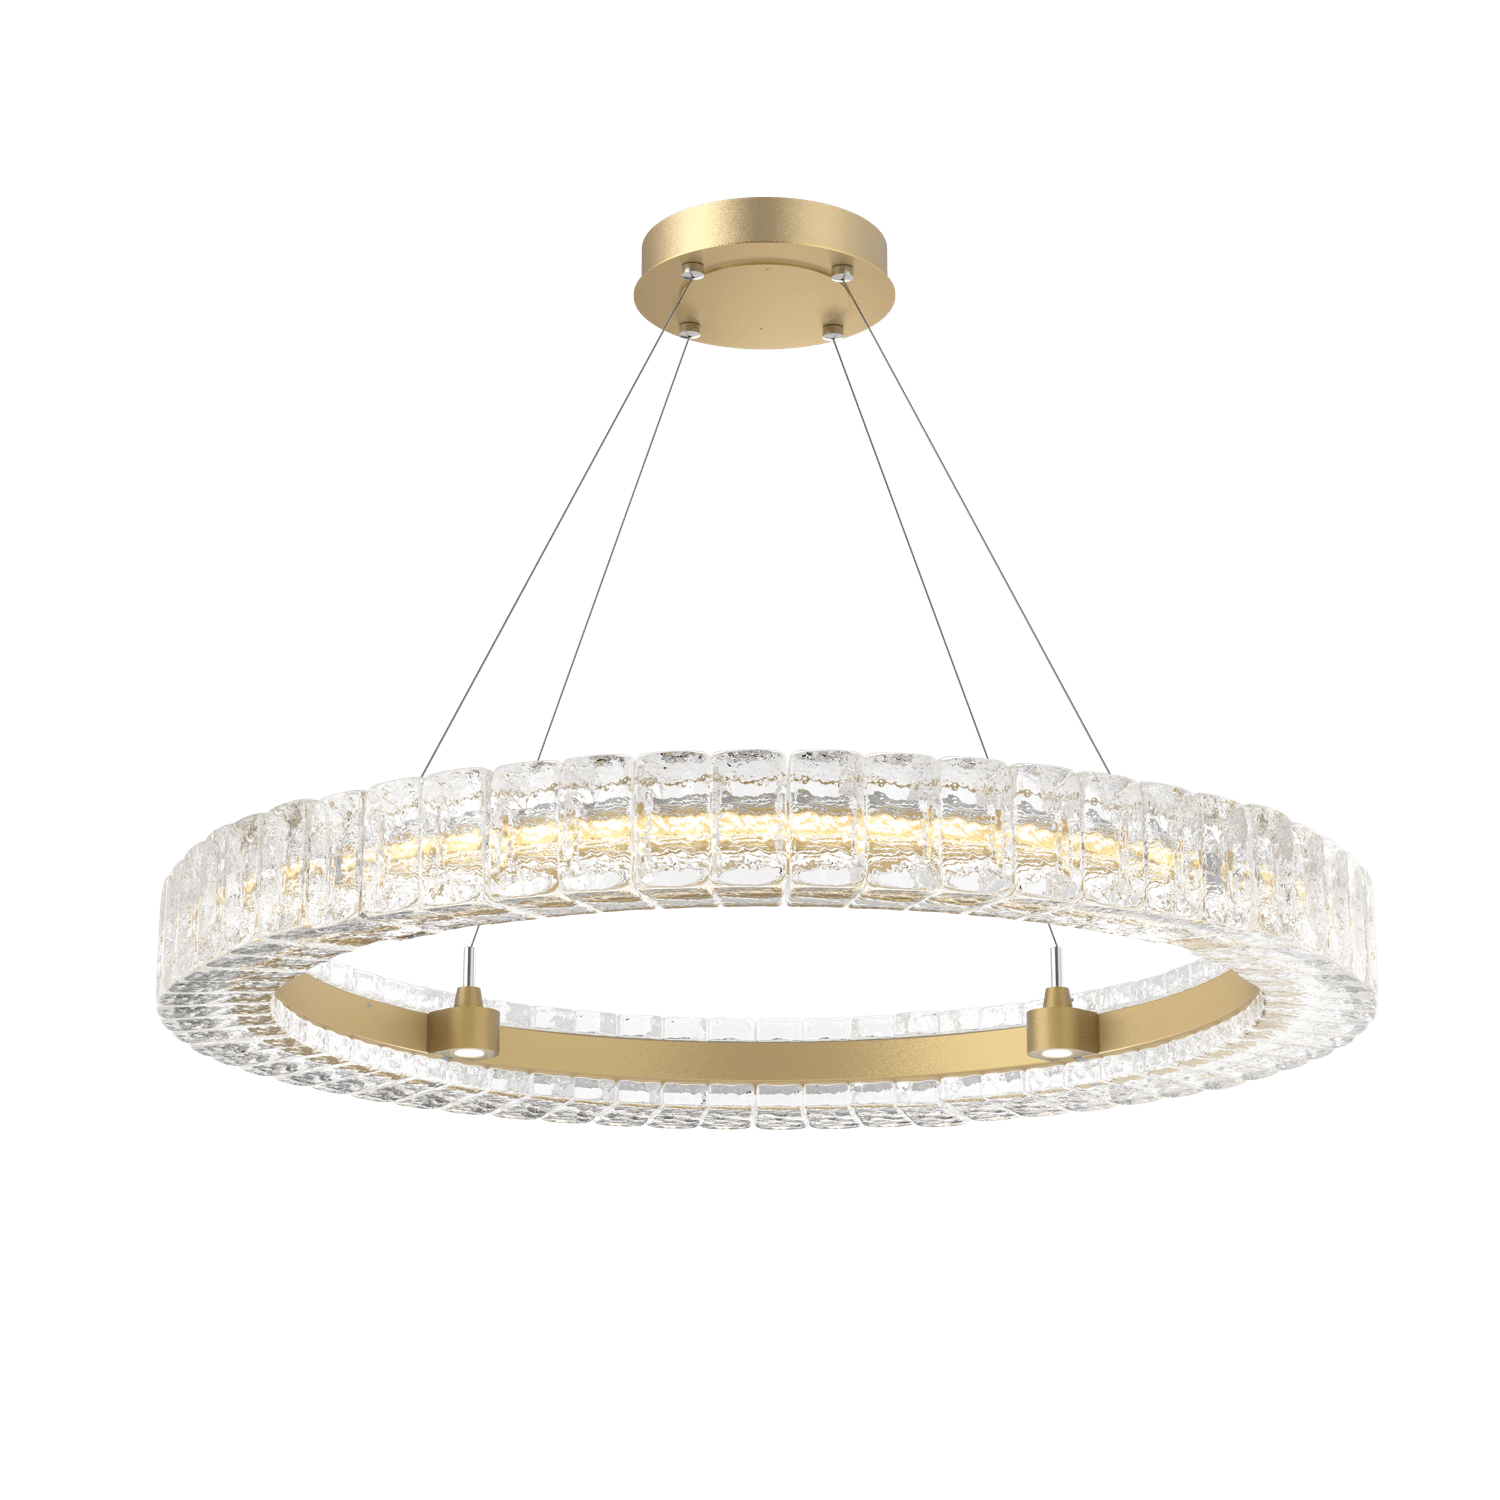 CHB0080-36-GB-Hammerton-Studio-Asscher-36-inch-ring-chandelier-with-gilded-brass-finish-and-clear-cast-glass-shades-and-LED-lamping